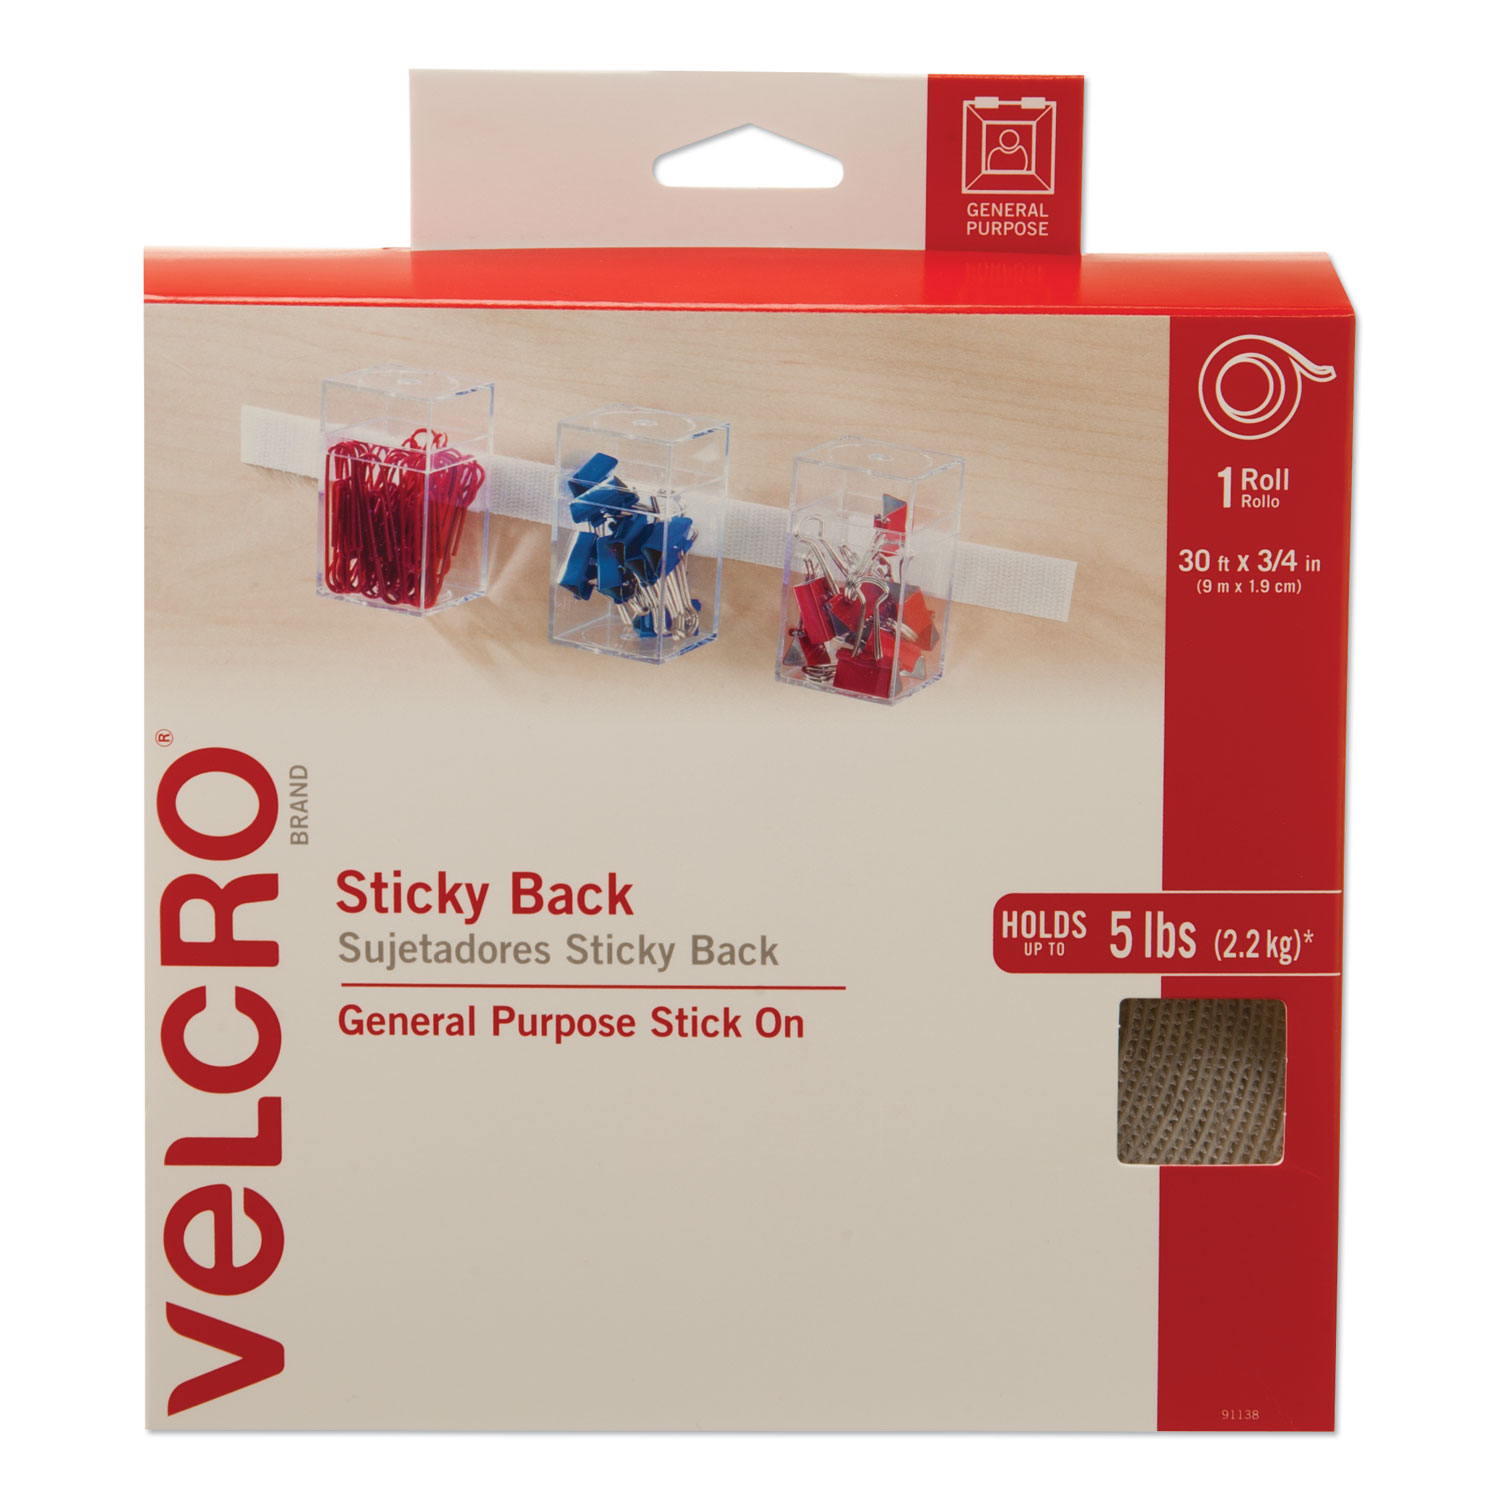  VELCRO Brand 91138 Sticky-Back Fasteners, Removable Adhesive, 0.75 x 30 ft, White (VEK91138) 